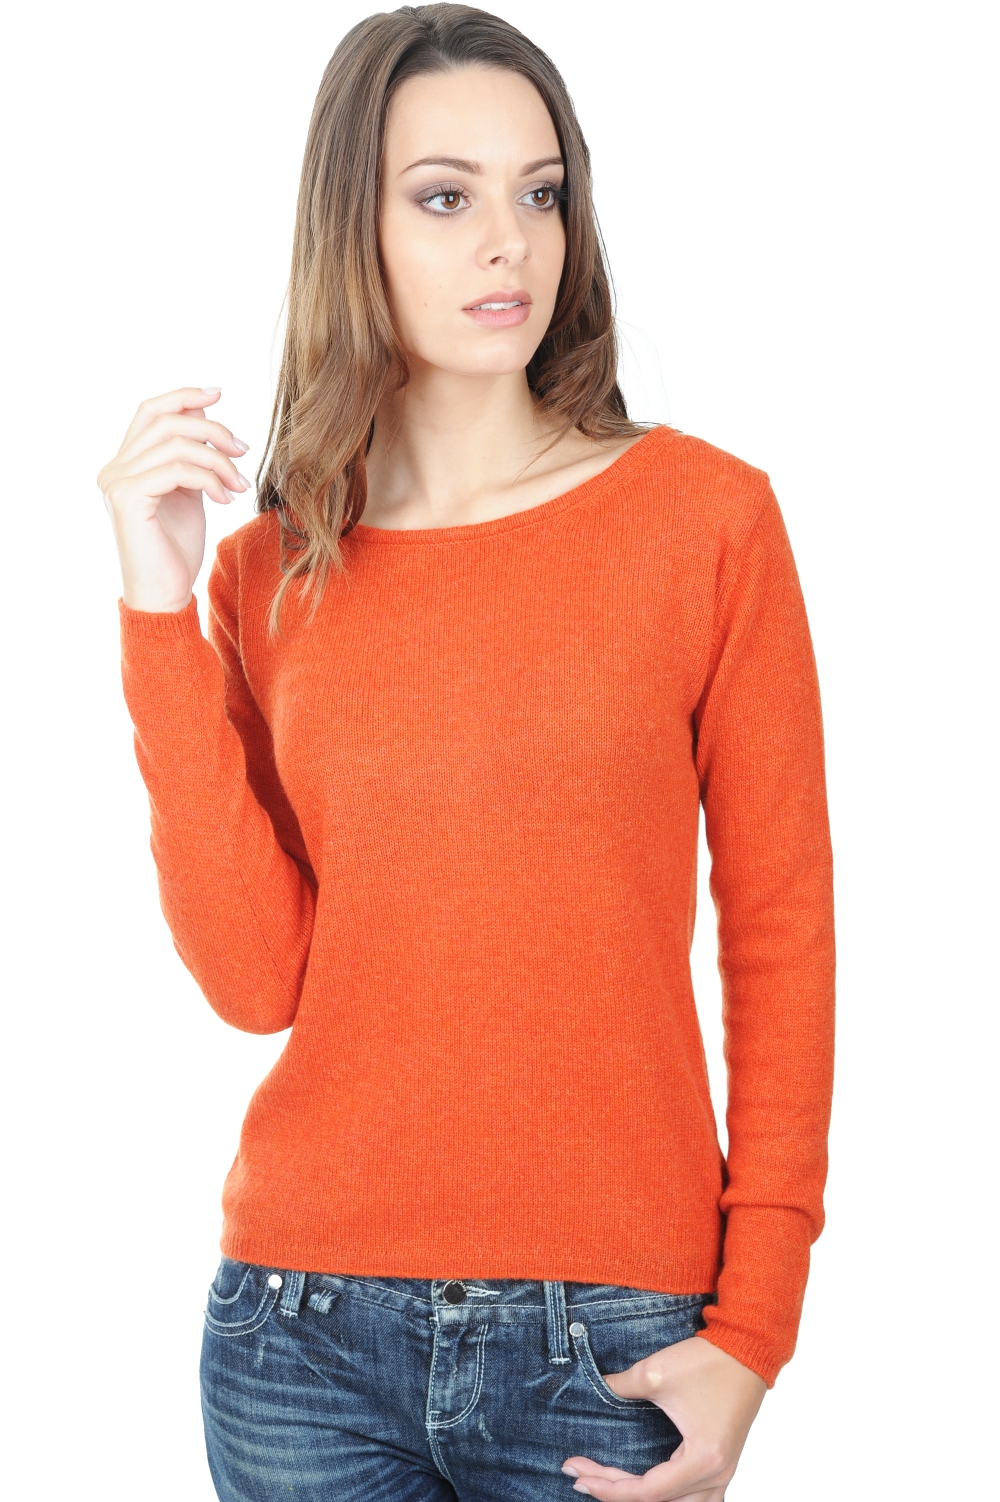 Cashmere ladies basic sweaters at low prices caleen paprika s